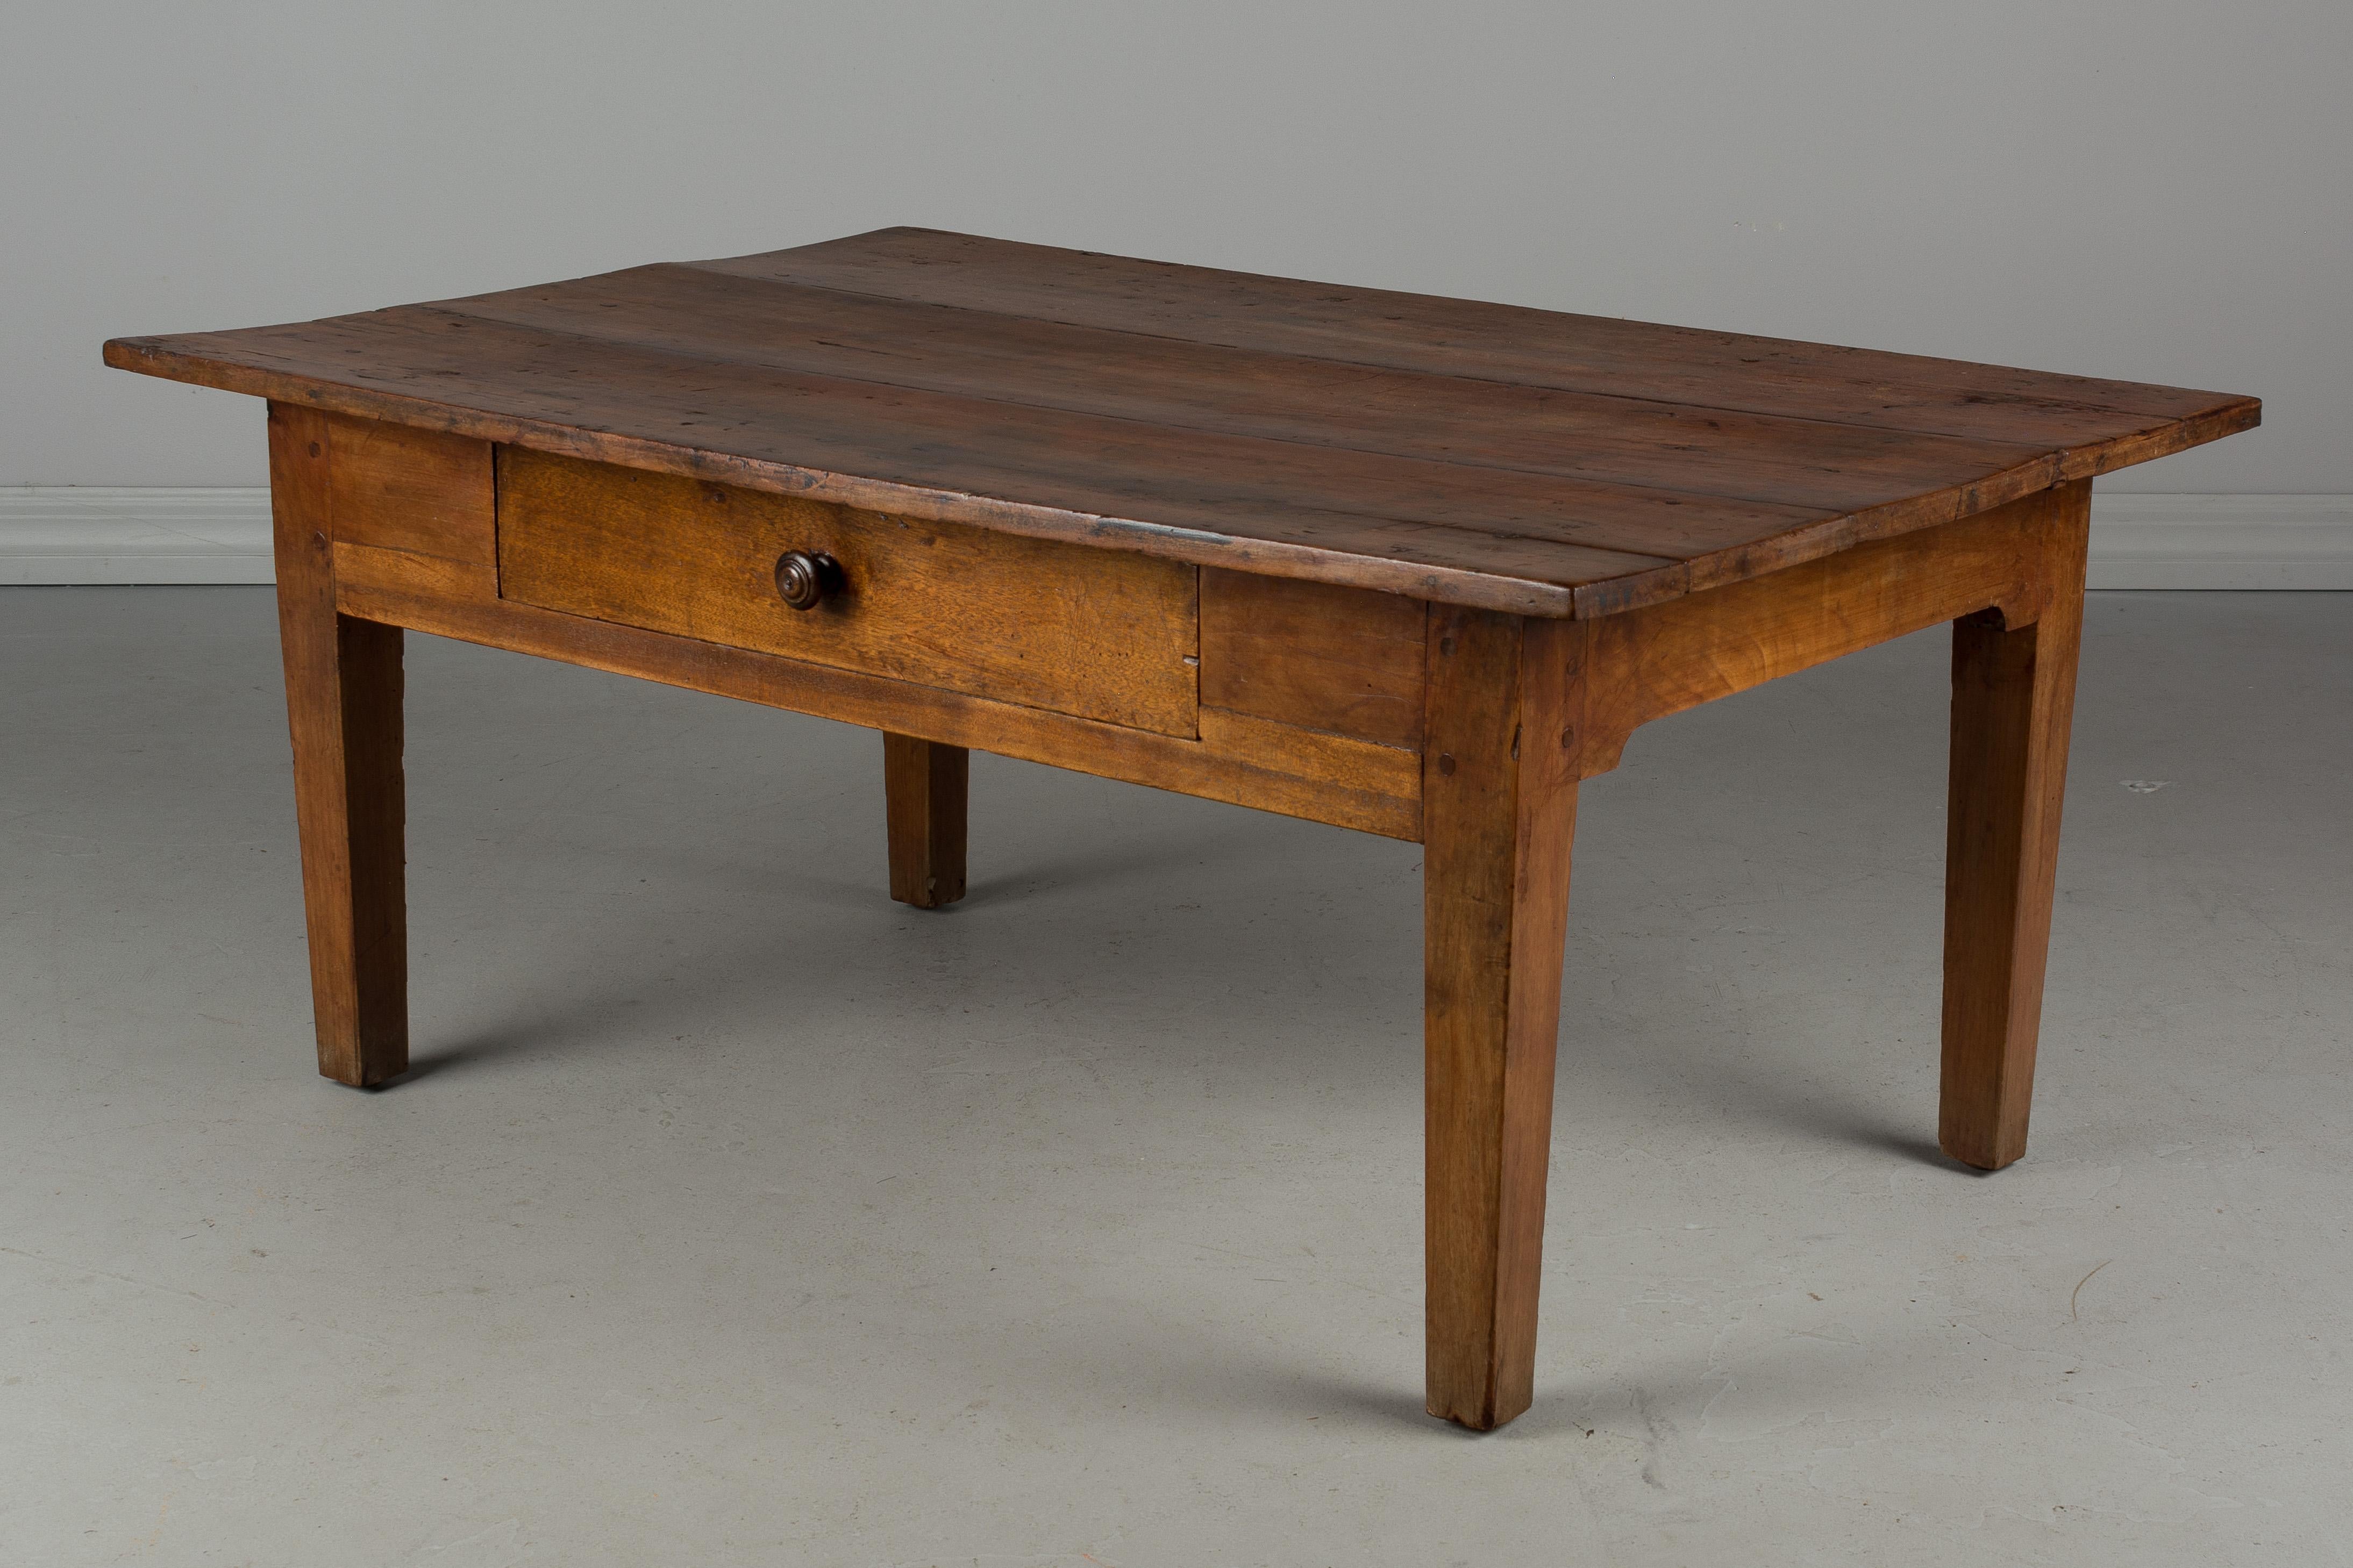 A 19th century Country French coffee table made of cheerywood. Dovetailed drawer. Pegged construction. Waxed patina. Used to be a small kitchen table and the legs were shorten.